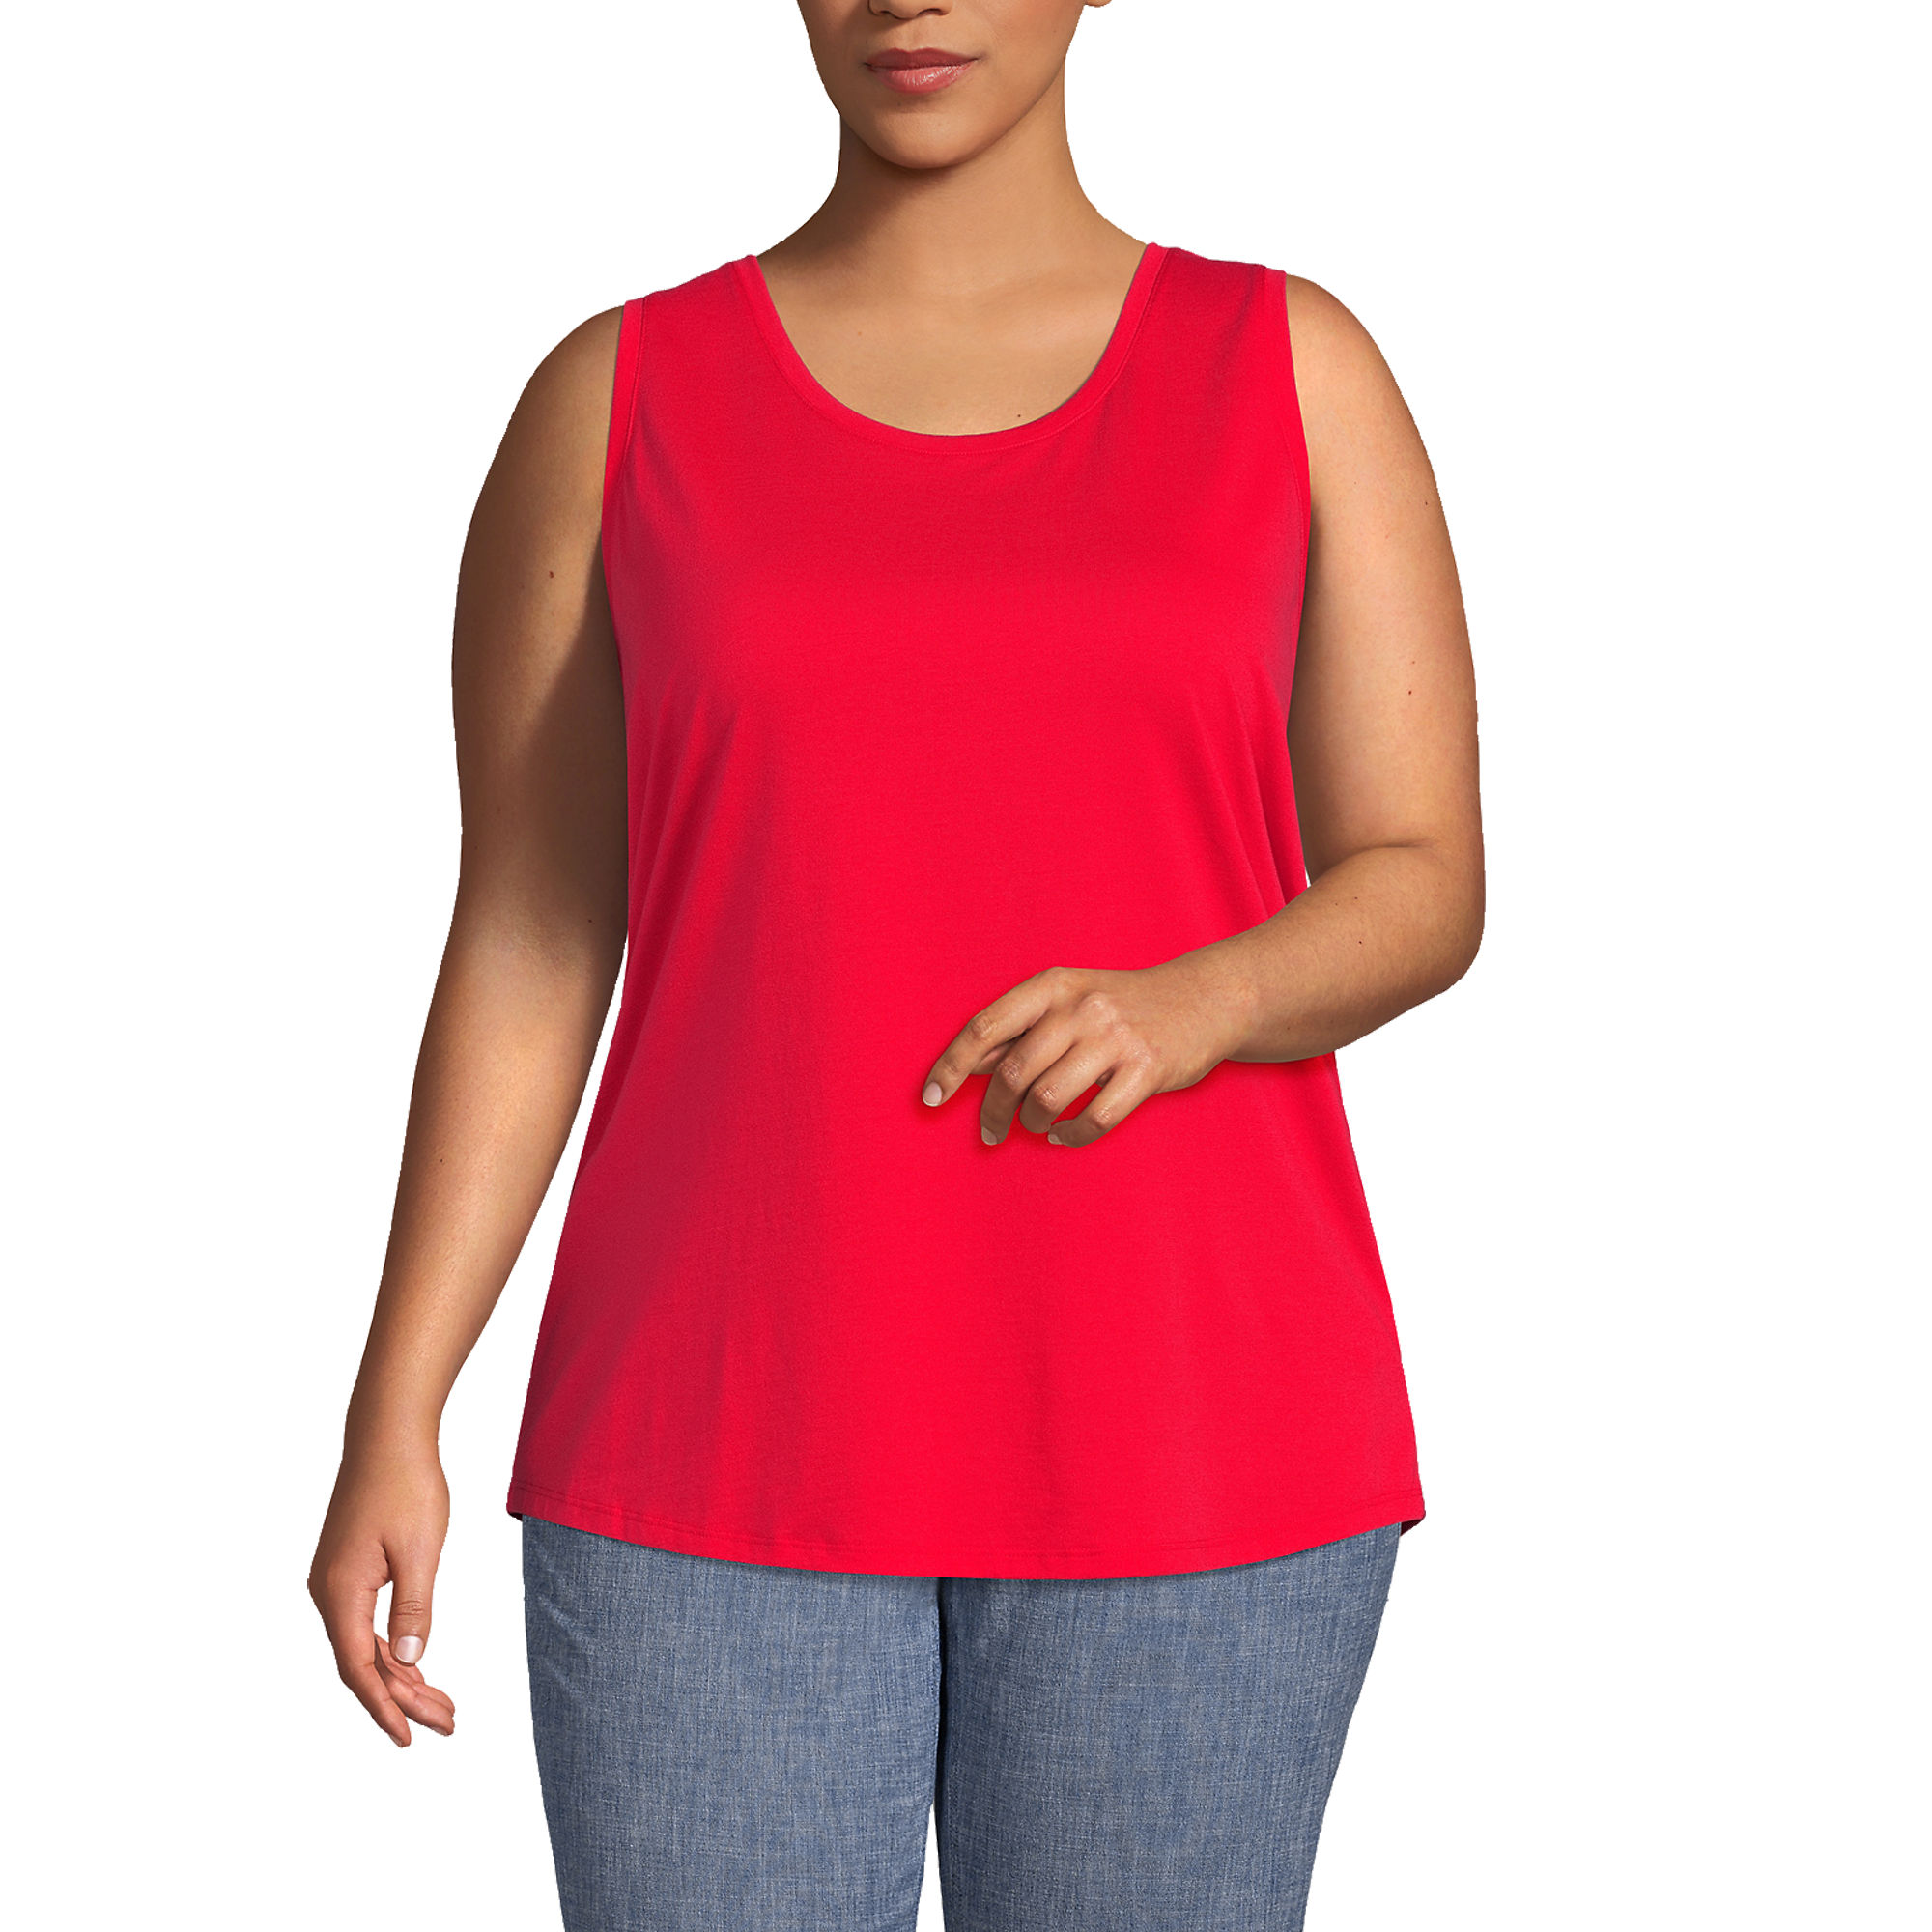 Lands End Women's Plus Size Supima Cotton Scoop Neck Tunic Tank Top (Compass Red)